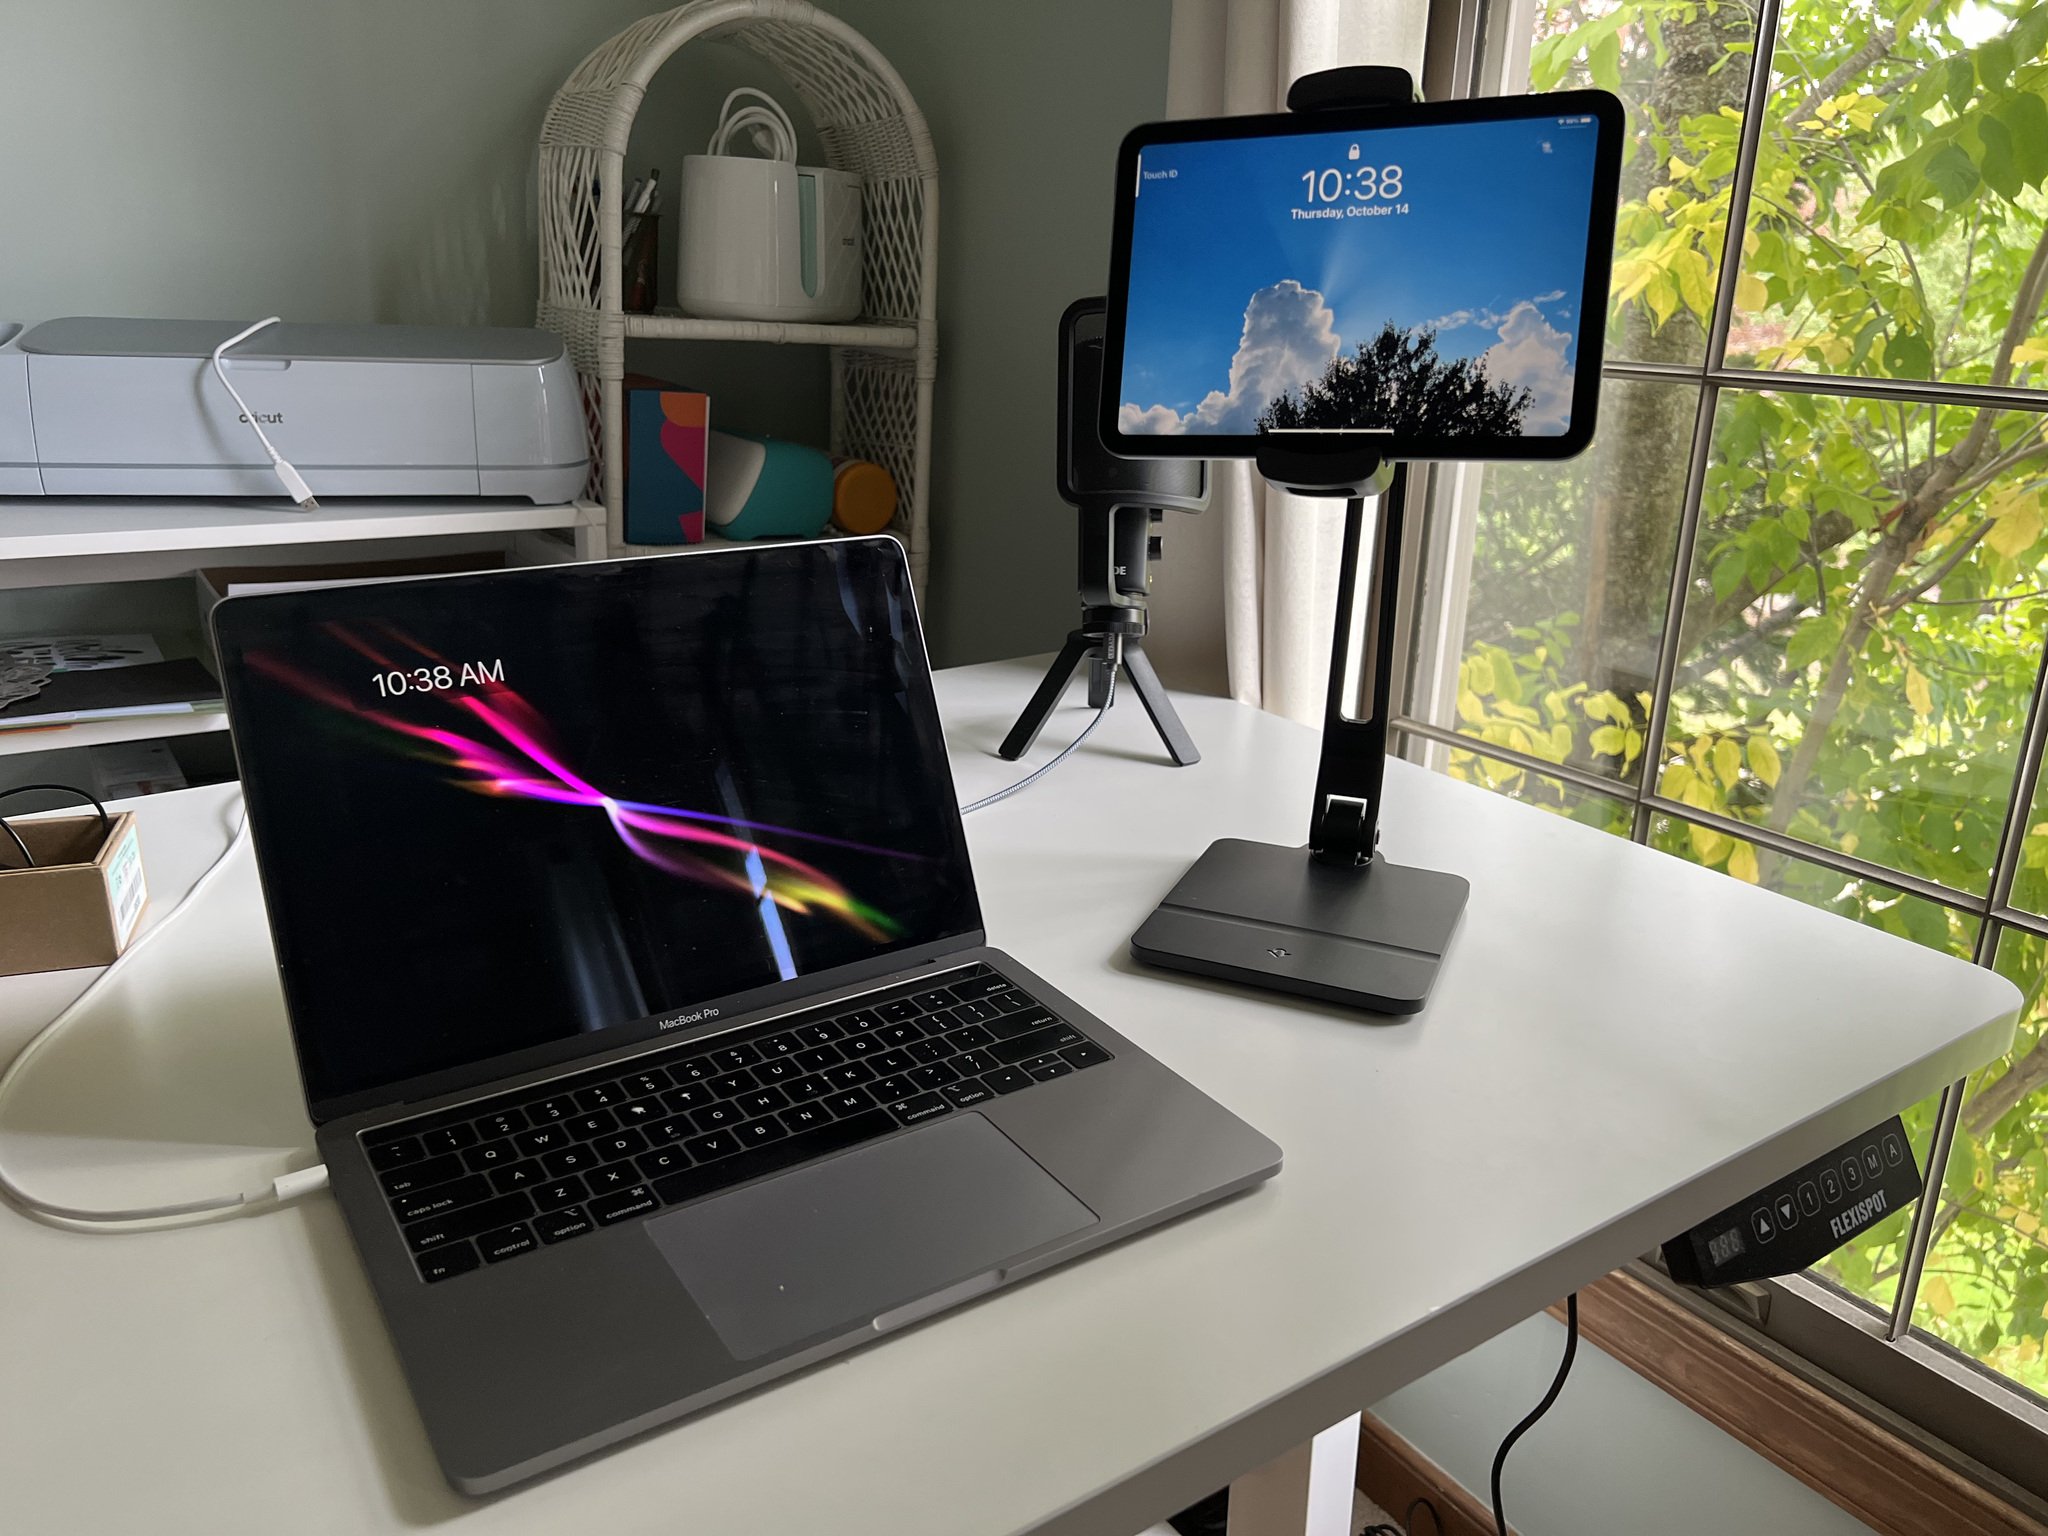 HoverBar Duo Flexible Arm for iPad and iPhone